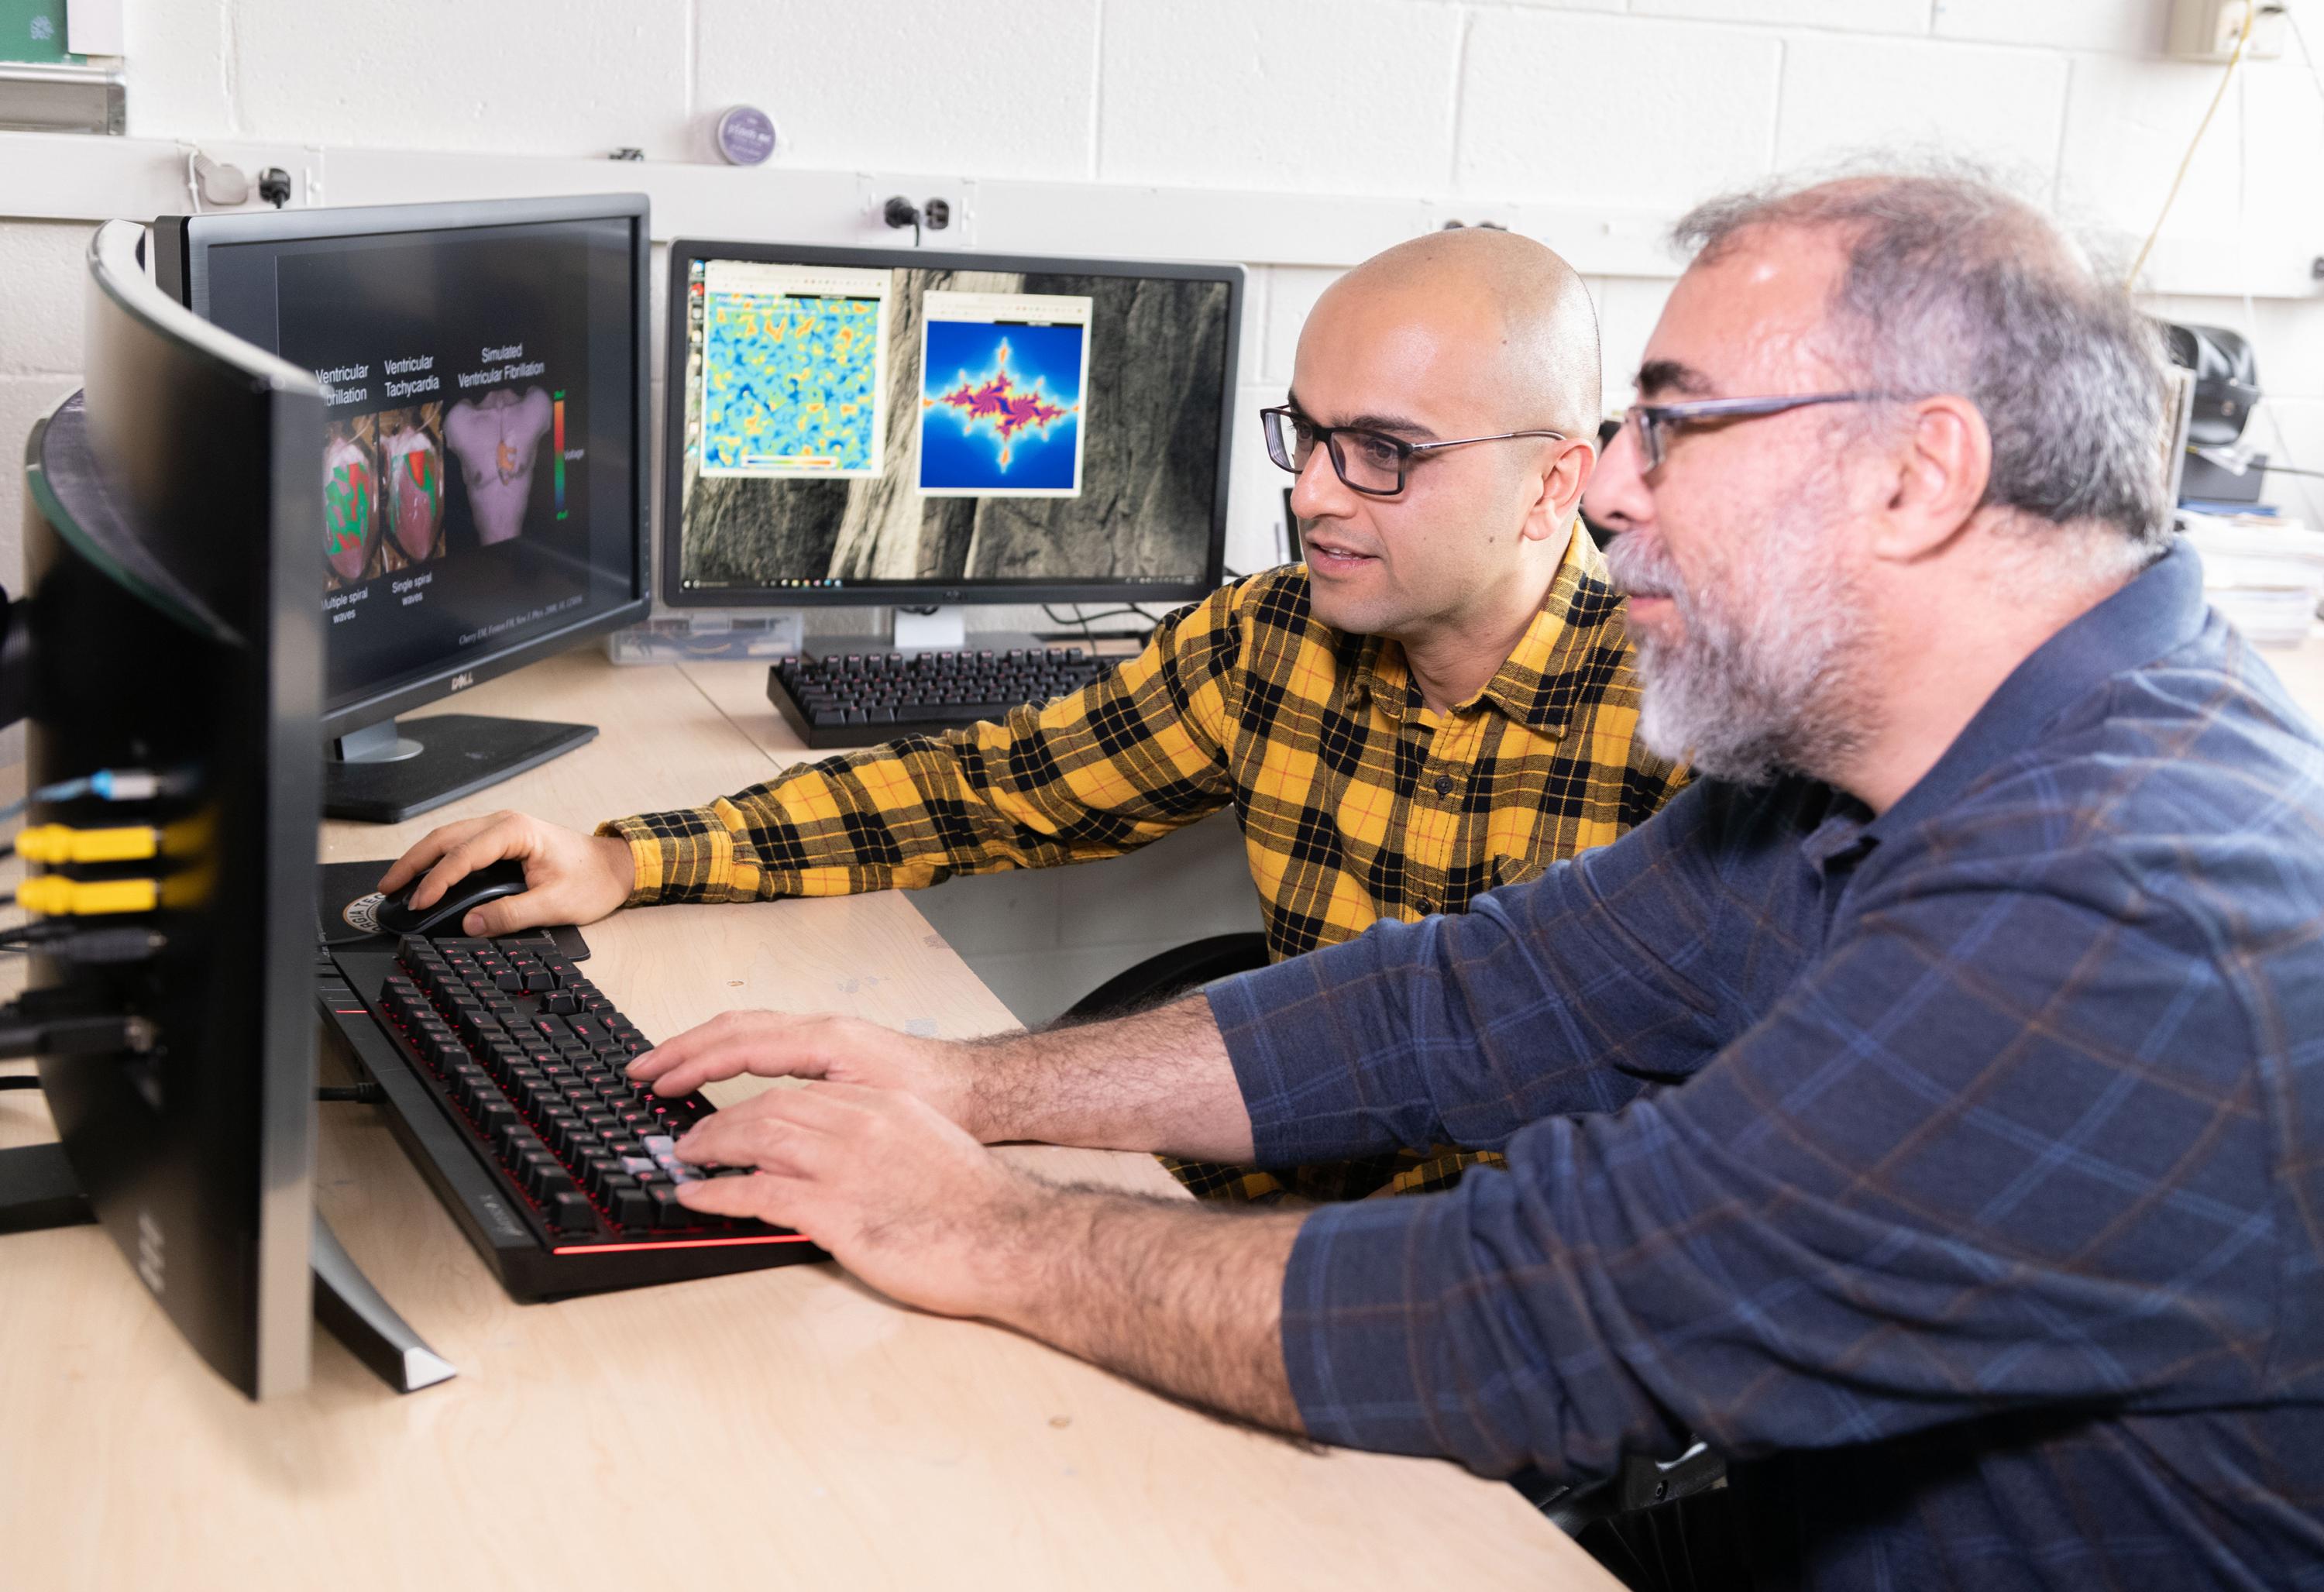 Professor Flavio Fenton and Research Scientist Abouzar Kaboudian discuss simulations running on a system that uses graphics processing chips designed for gaming applications and software that runs on ordinary web browsers. (Photo: Allison Carter, Georgia Tech)